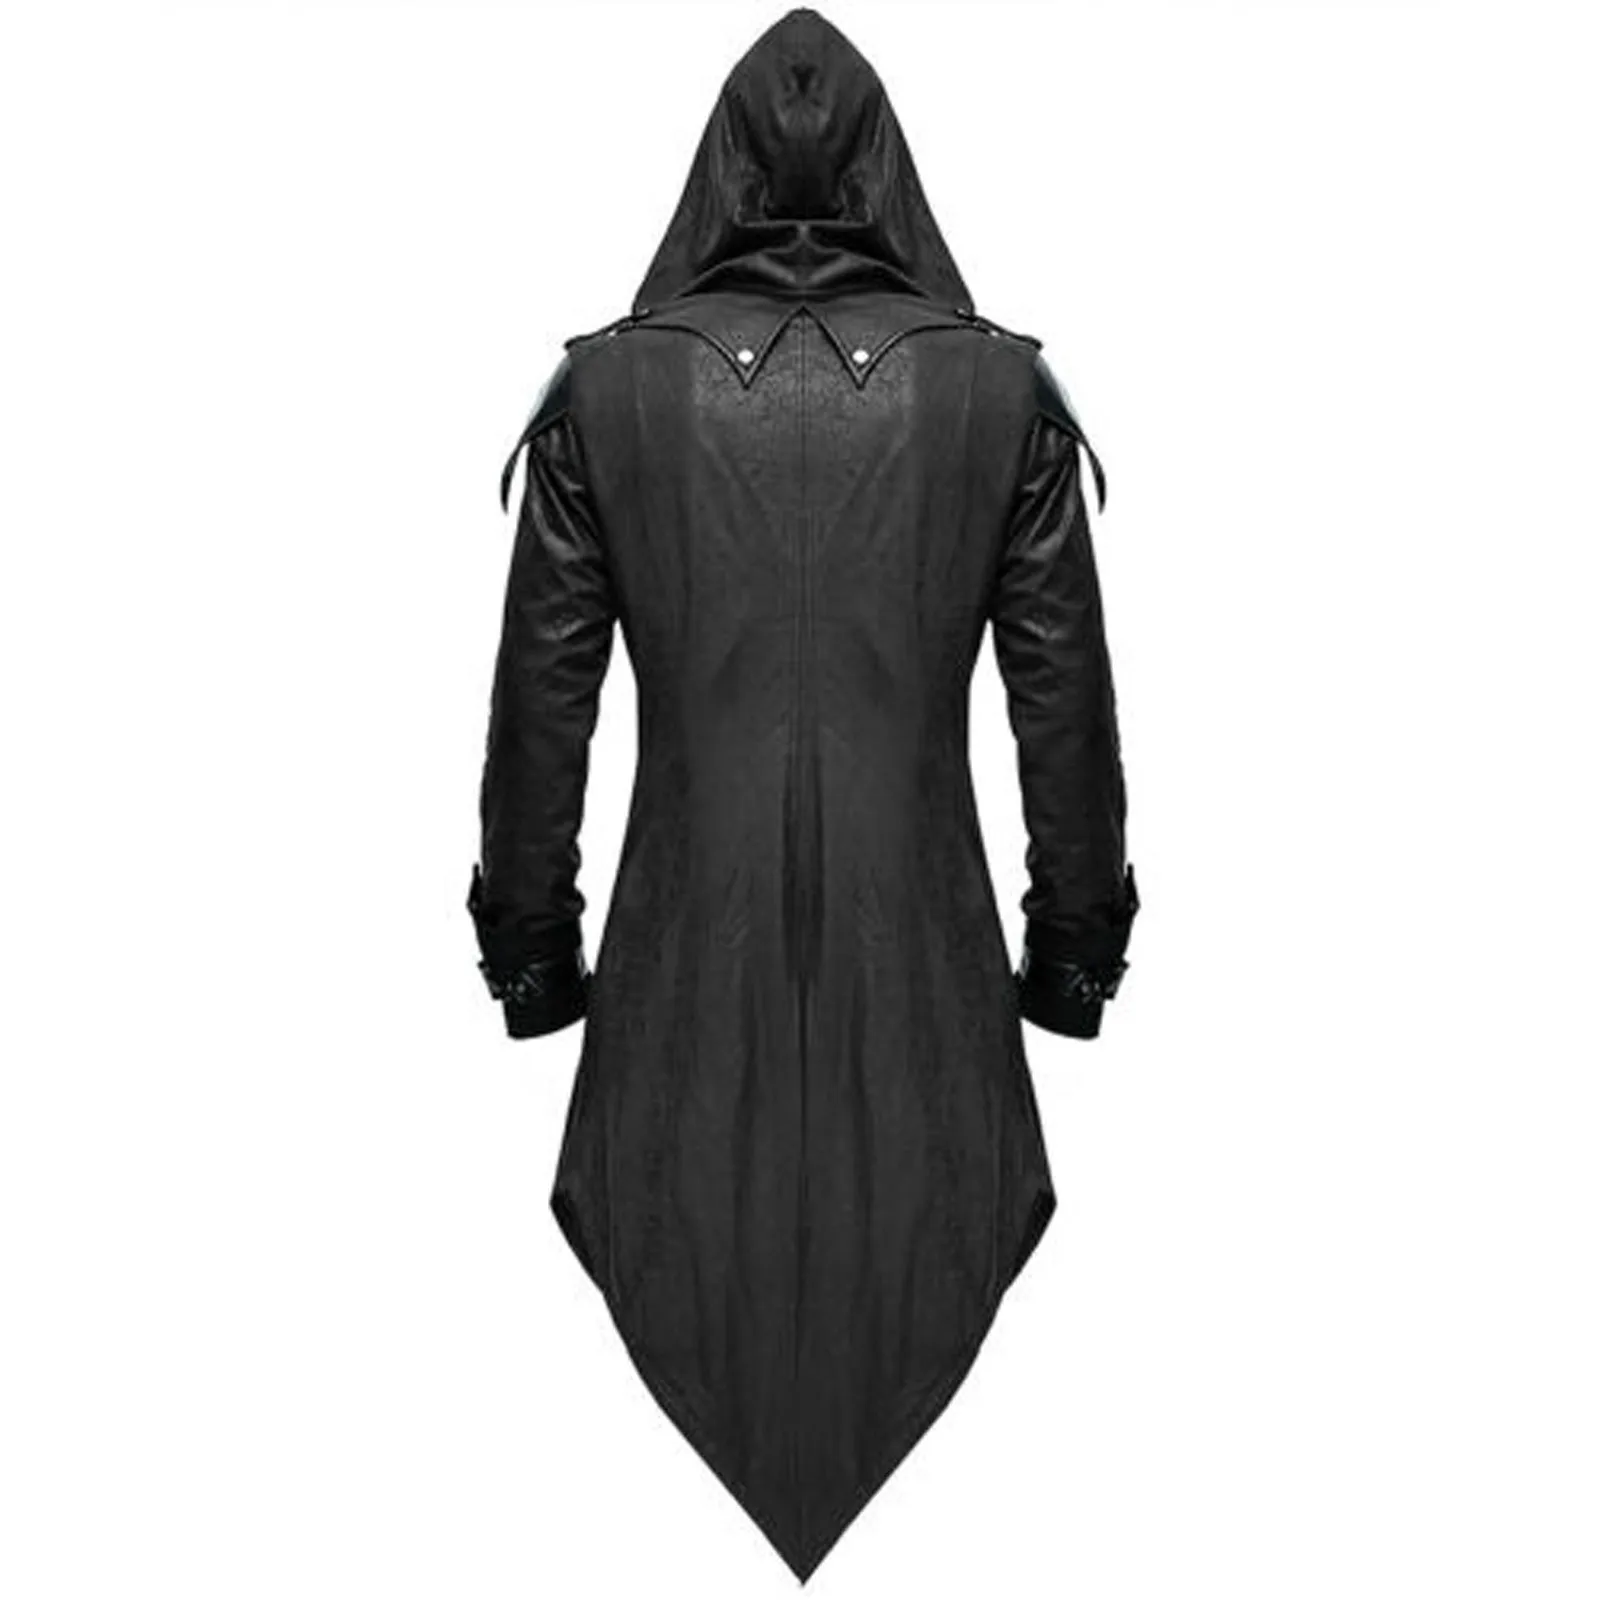 Men Tailcoat Jacket Medieval Costume Gothic Steampunk Black Retro Long Sleeve Uniform Hoodie Party Winter Overcoat Outwear